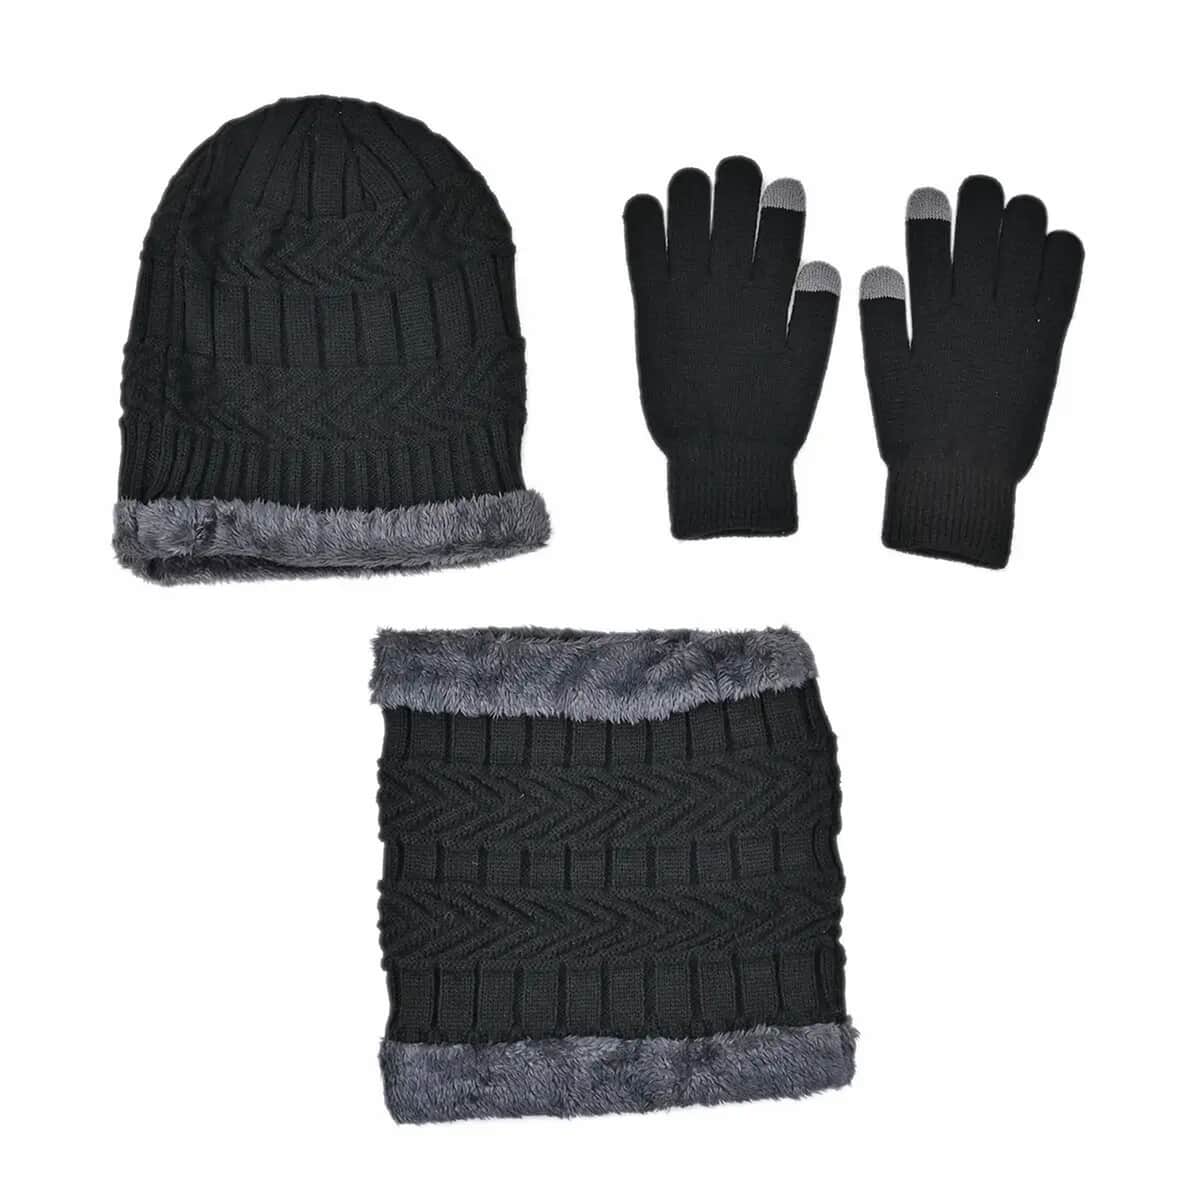 Black 100% Acrylic 3pcs Set Glove (8.66), Scarf (9.85x8.66) and Hat (10.24x9.05) image number 0